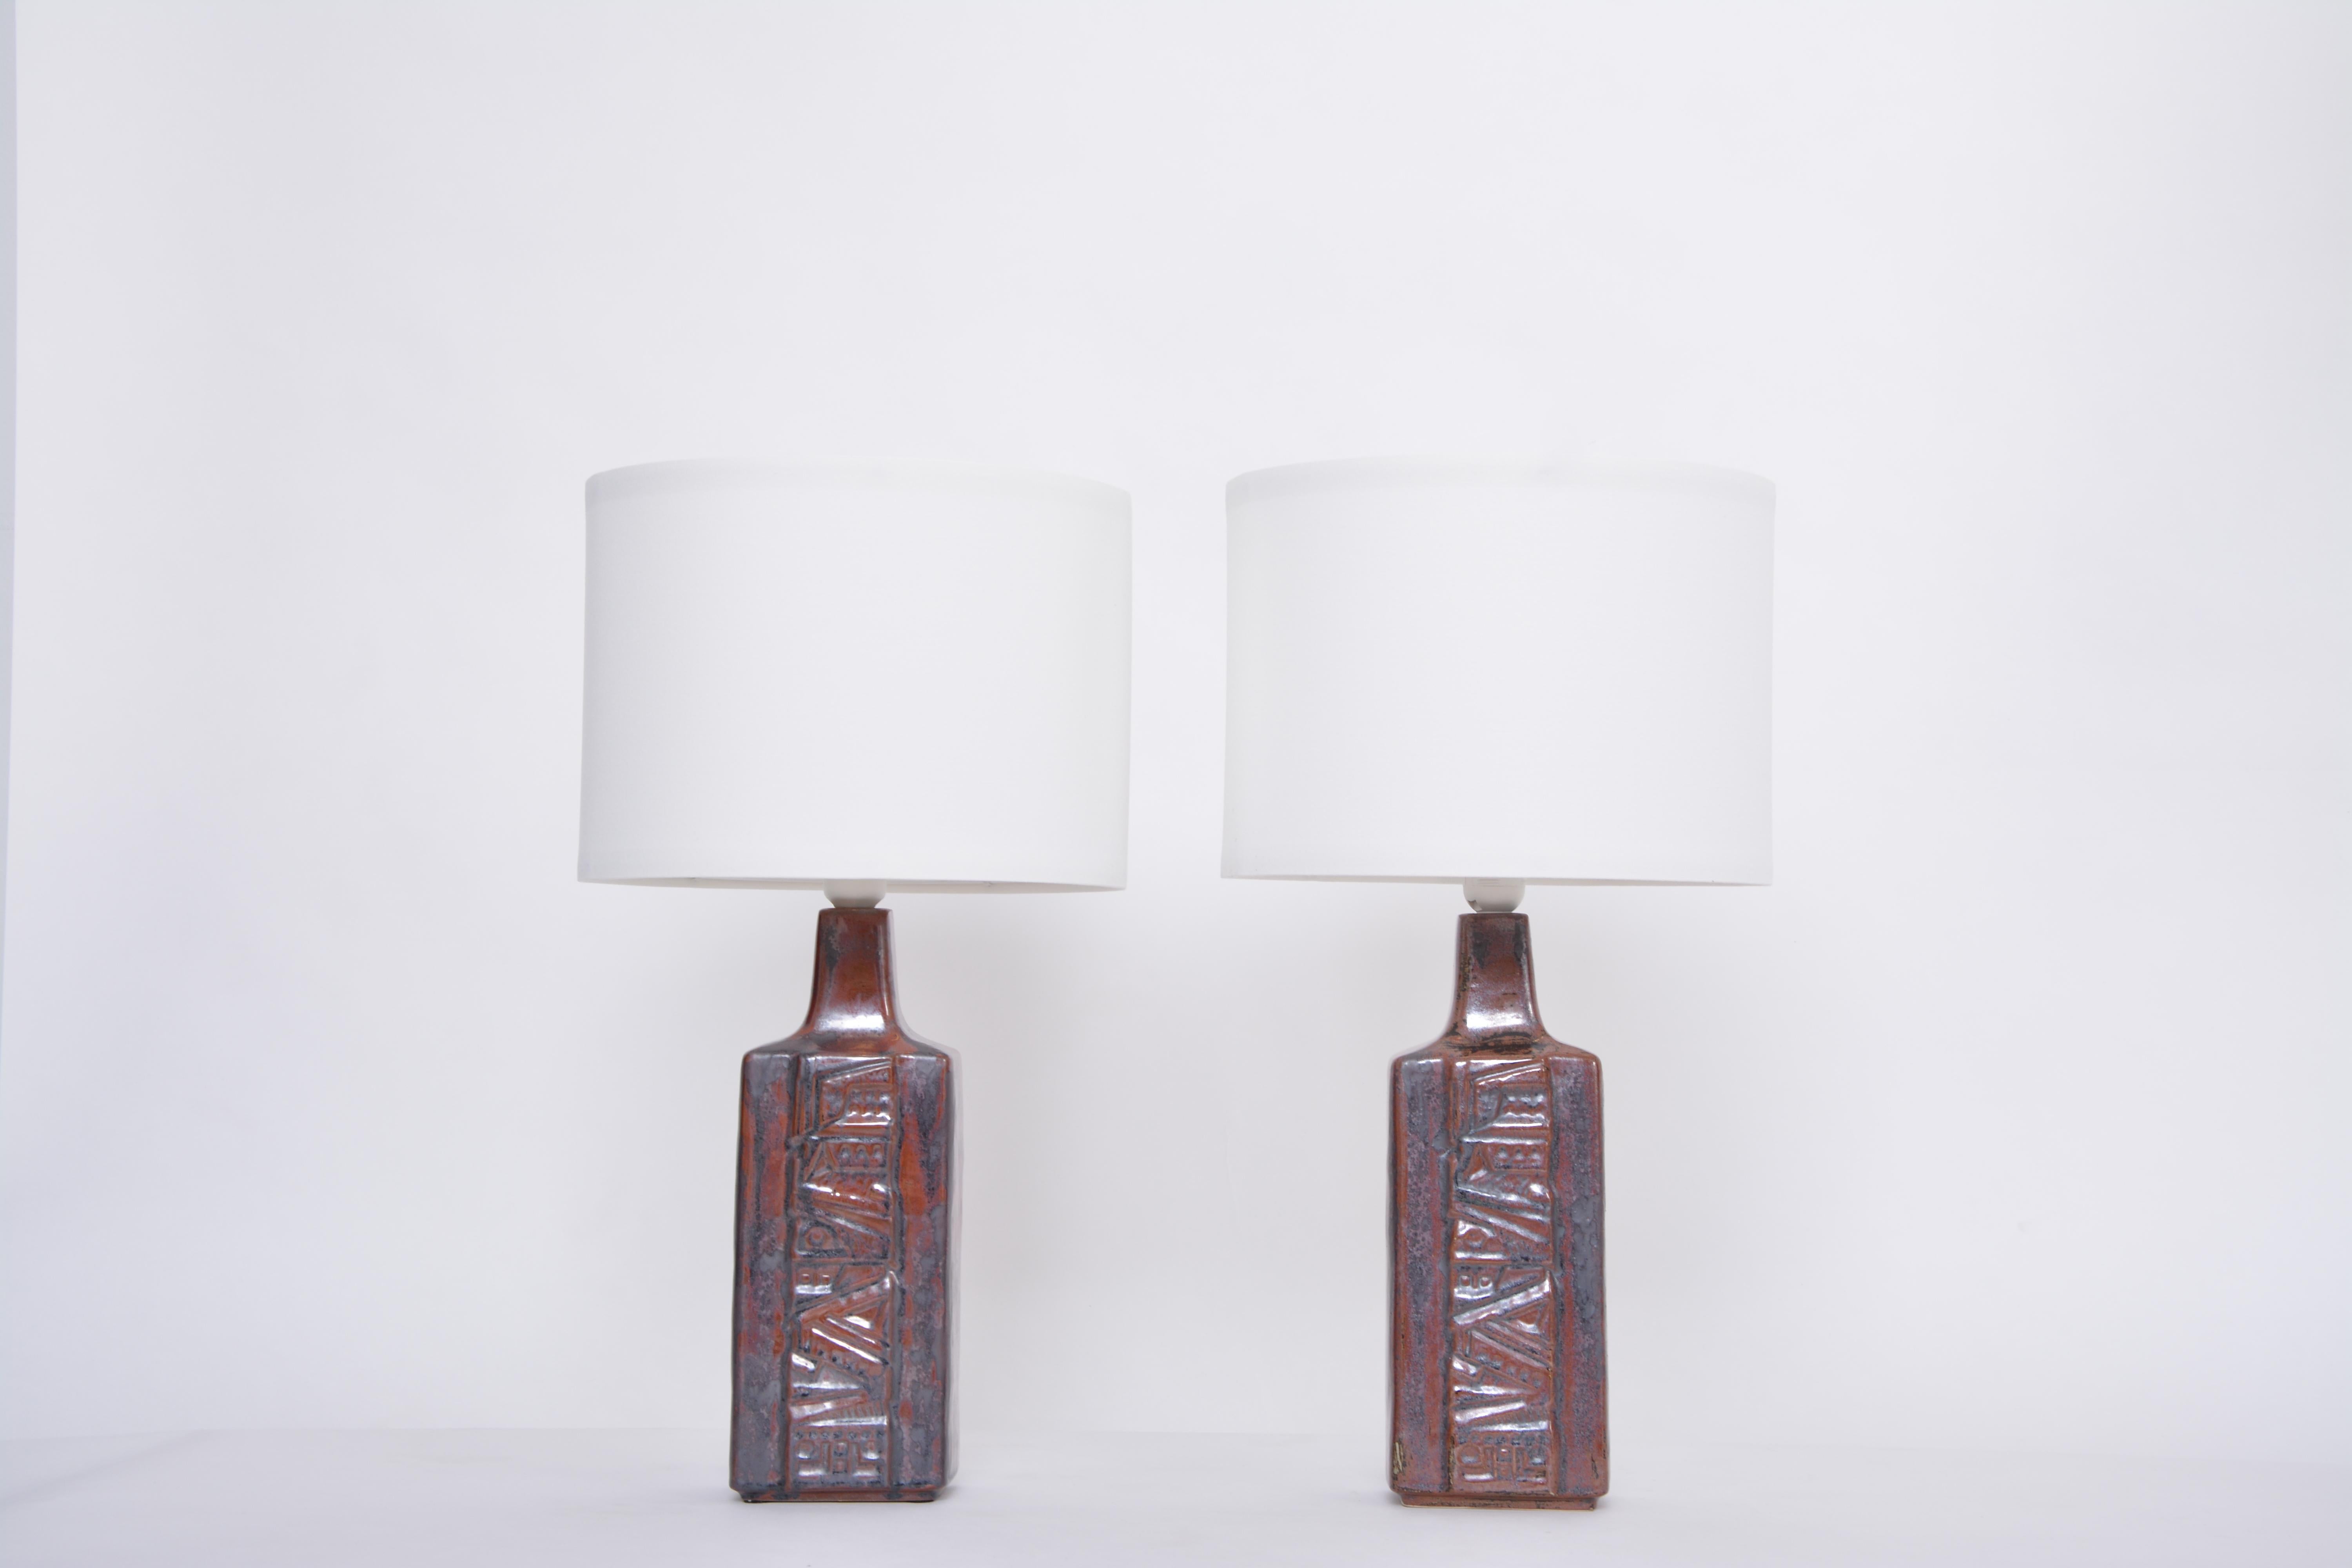 Pair of Danish Mid-Century Modern Ceramic Table Lamps by Desiree Stentoj
These lamps were produced by Danish company Desiree Stentoj probably in the 1960s. The lamps are made of glazed stoneware. The bases feature an abstract geographic pattern and